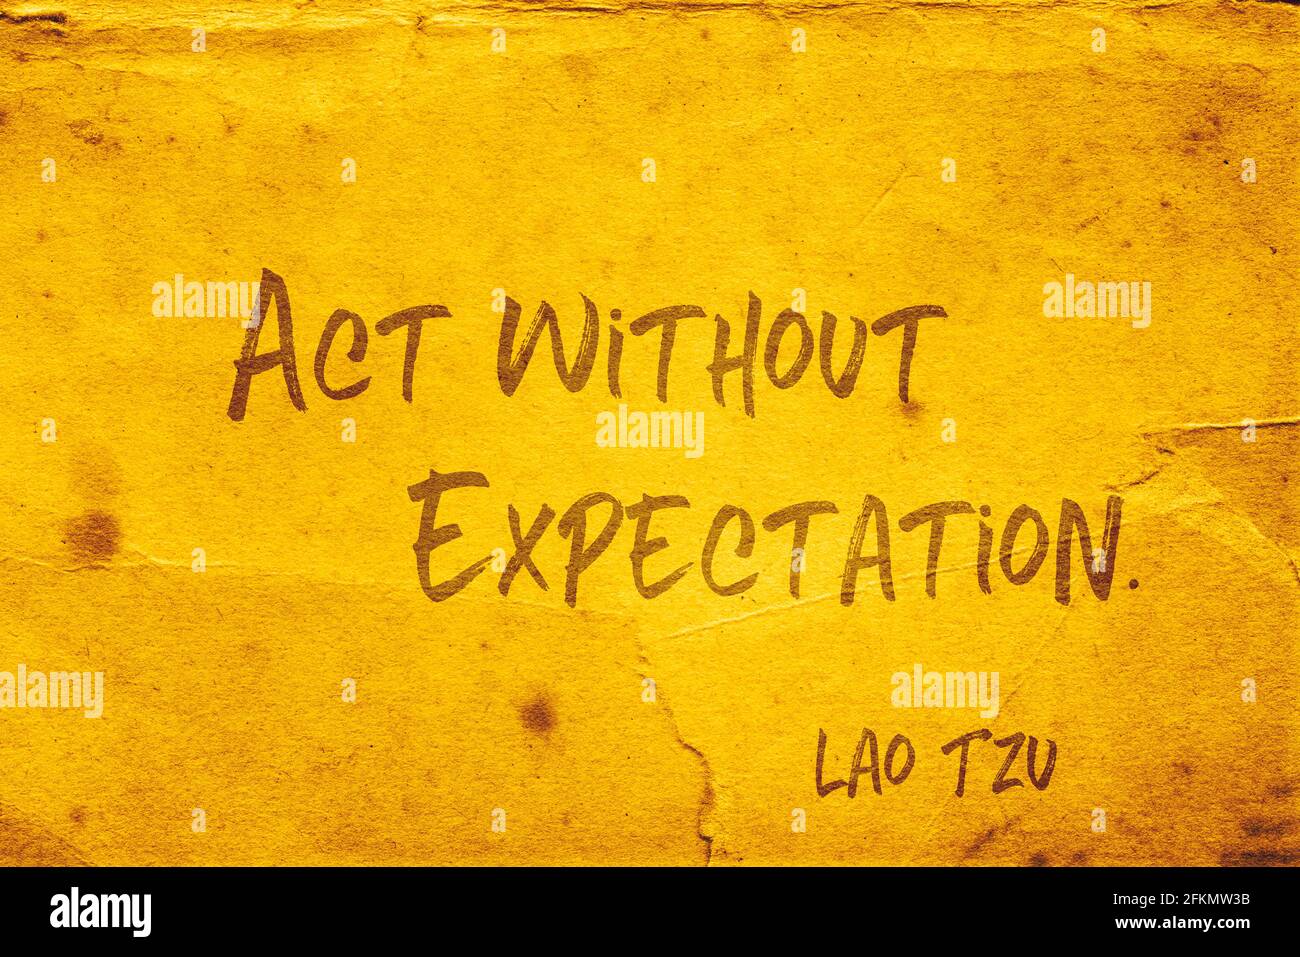 Fearless Soul on Twitter These Lao Tzu quotes will inspire your soul and  brighten your day httpstcoQuoh0pLZPU  Twitter